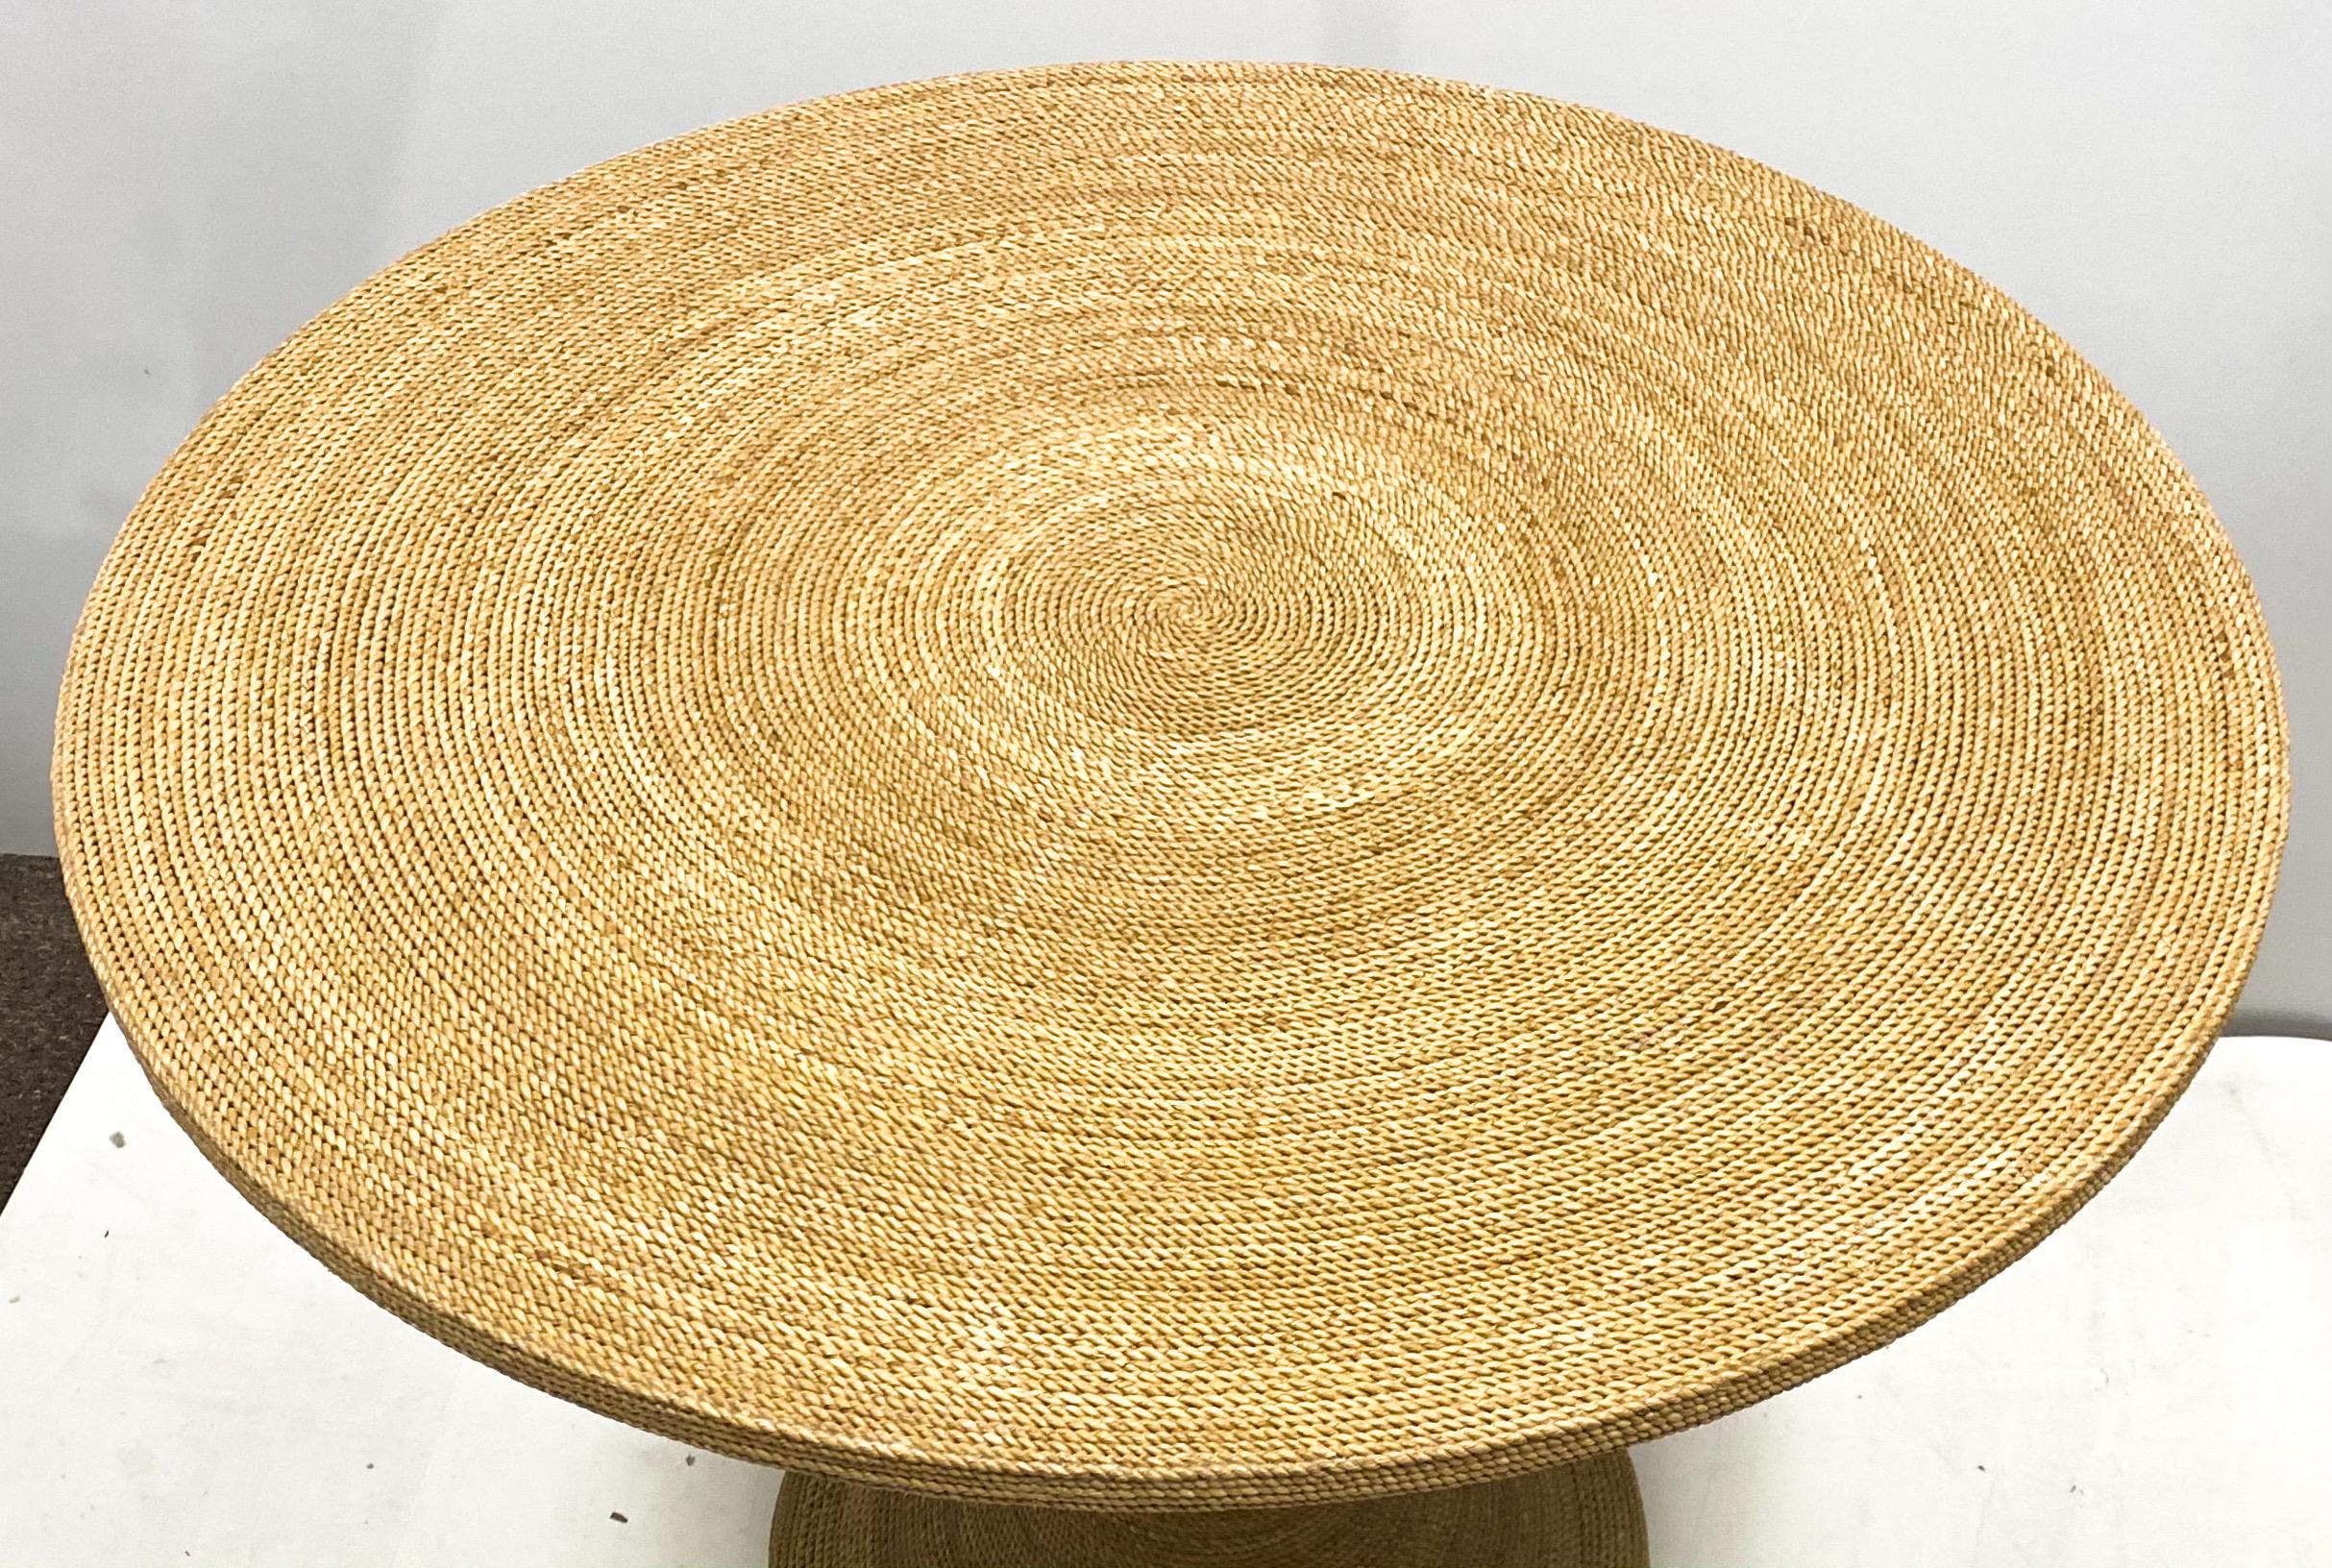 This is a modern tulip style woven seagrass table that dates to the 1970s. It is in very good condition and is unmarked. The seagrass is a series of concentric circles. Glass recommended for hard use.